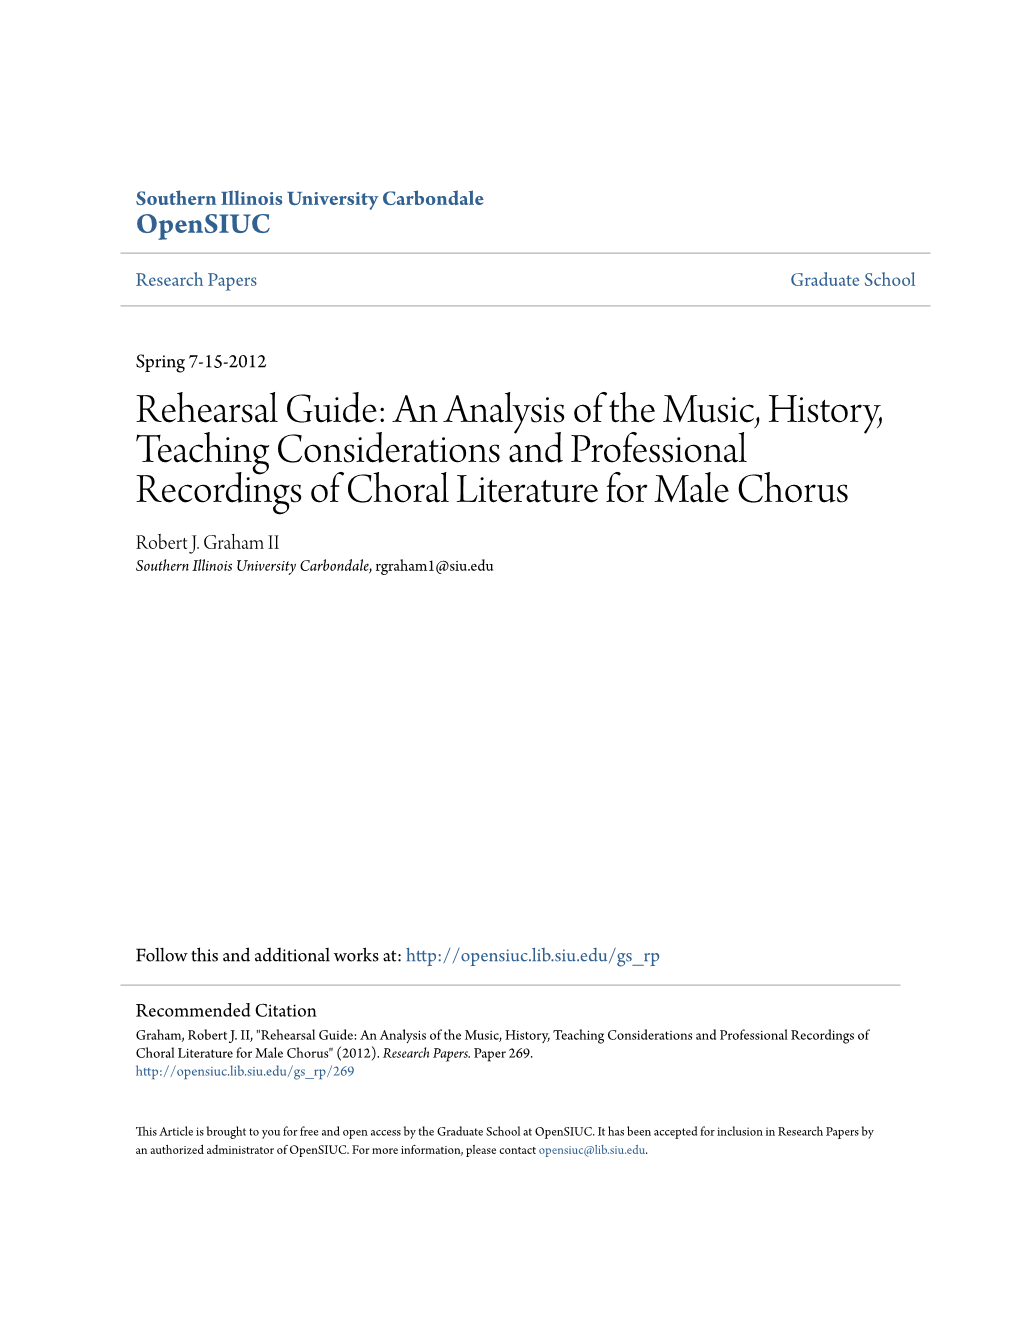 An Analysis of the Music, History, Teaching Considerations and Professional Recordings of Choral Literature for Male Chorus Robert J